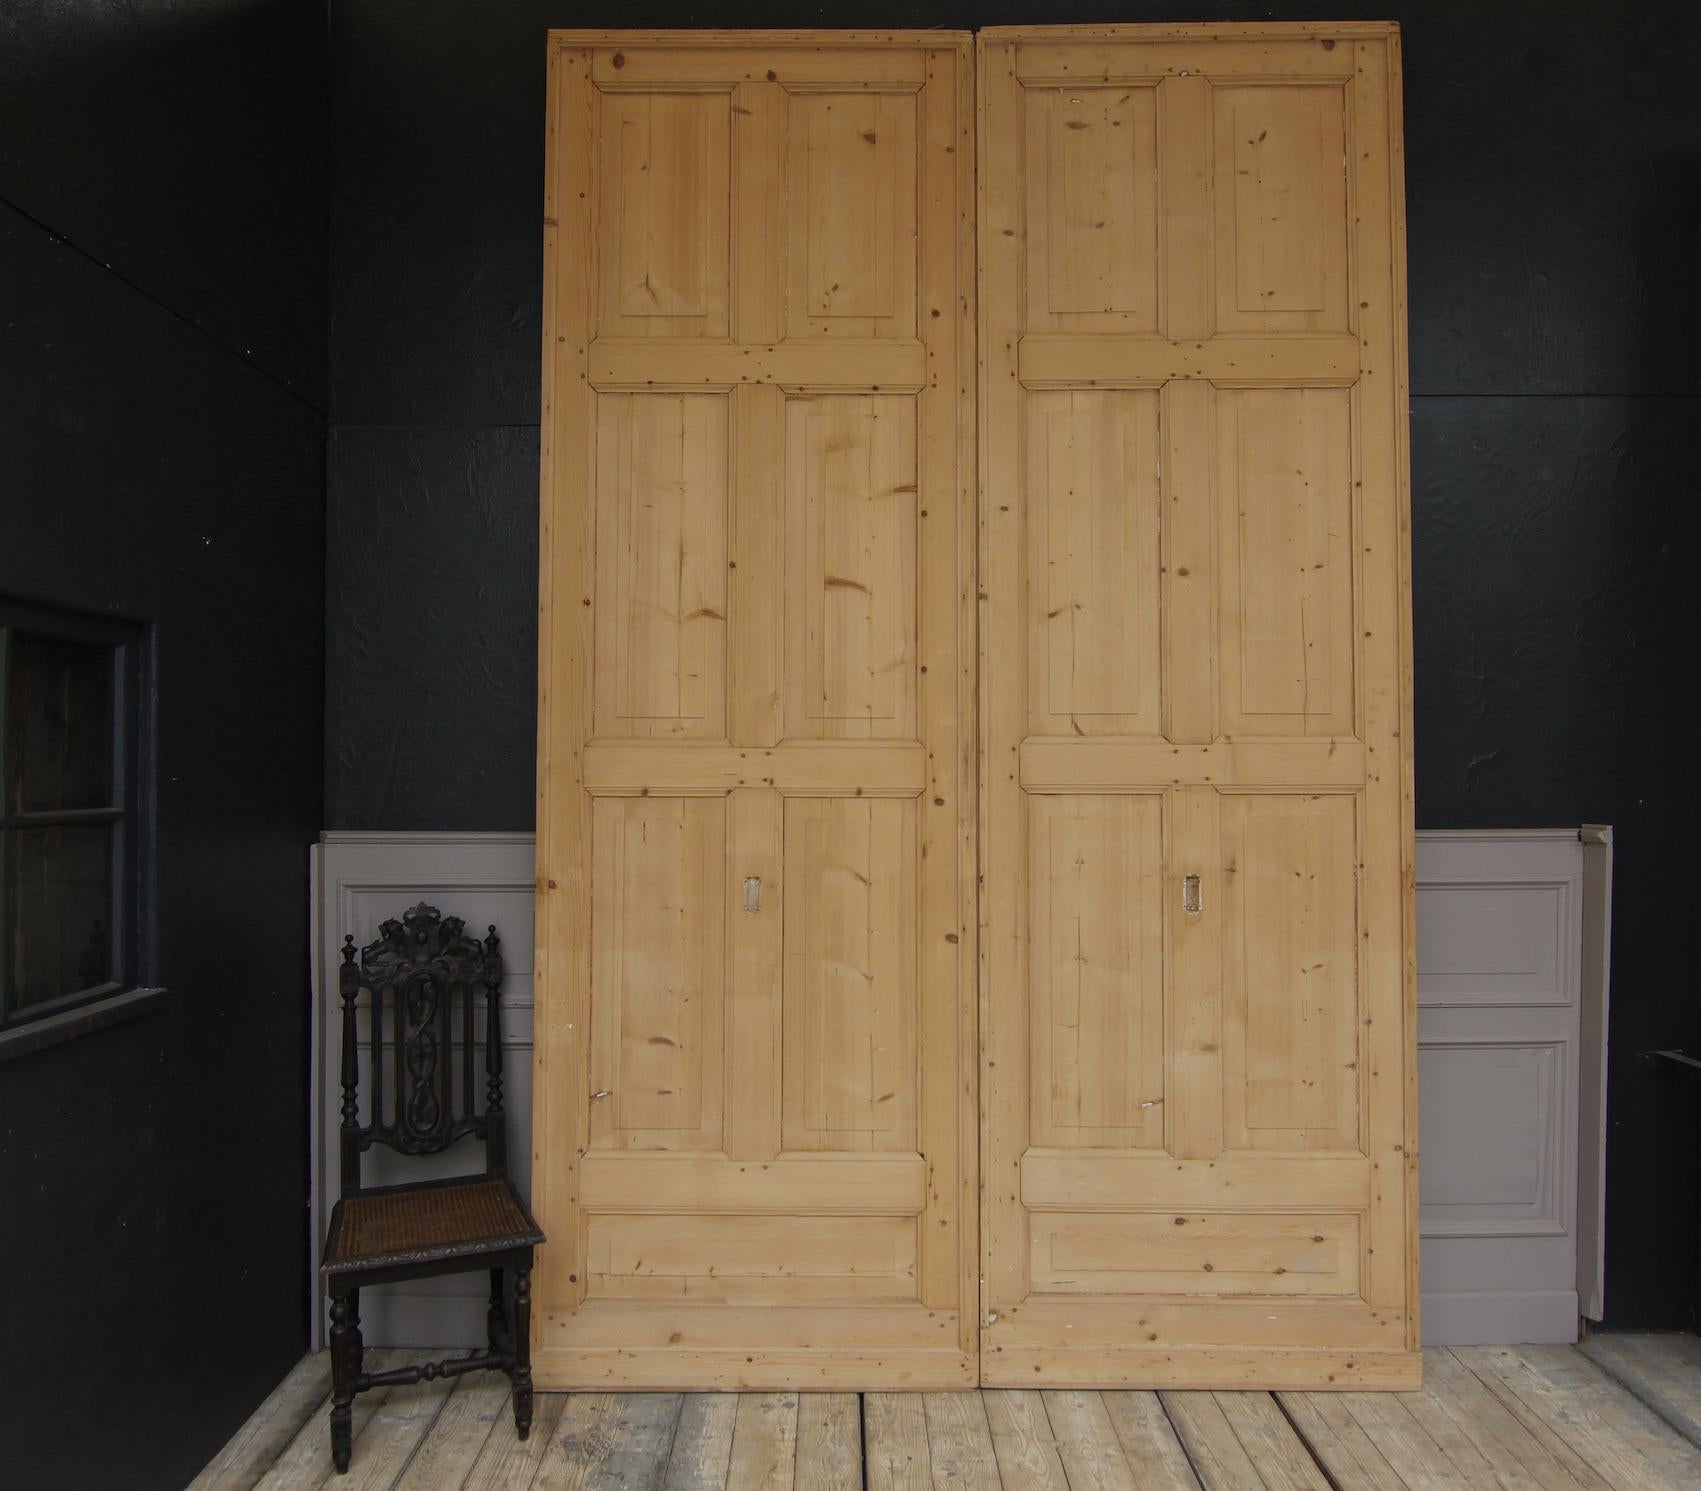 Two large sliding doors from a Swiss villa from around 1900. Made of solid pine wood, each with 7 panels.
The doors are freed from paint in the raw wood state, ready for further processing.

Dimensions per door:
327 cm high / 128.7 inch high,